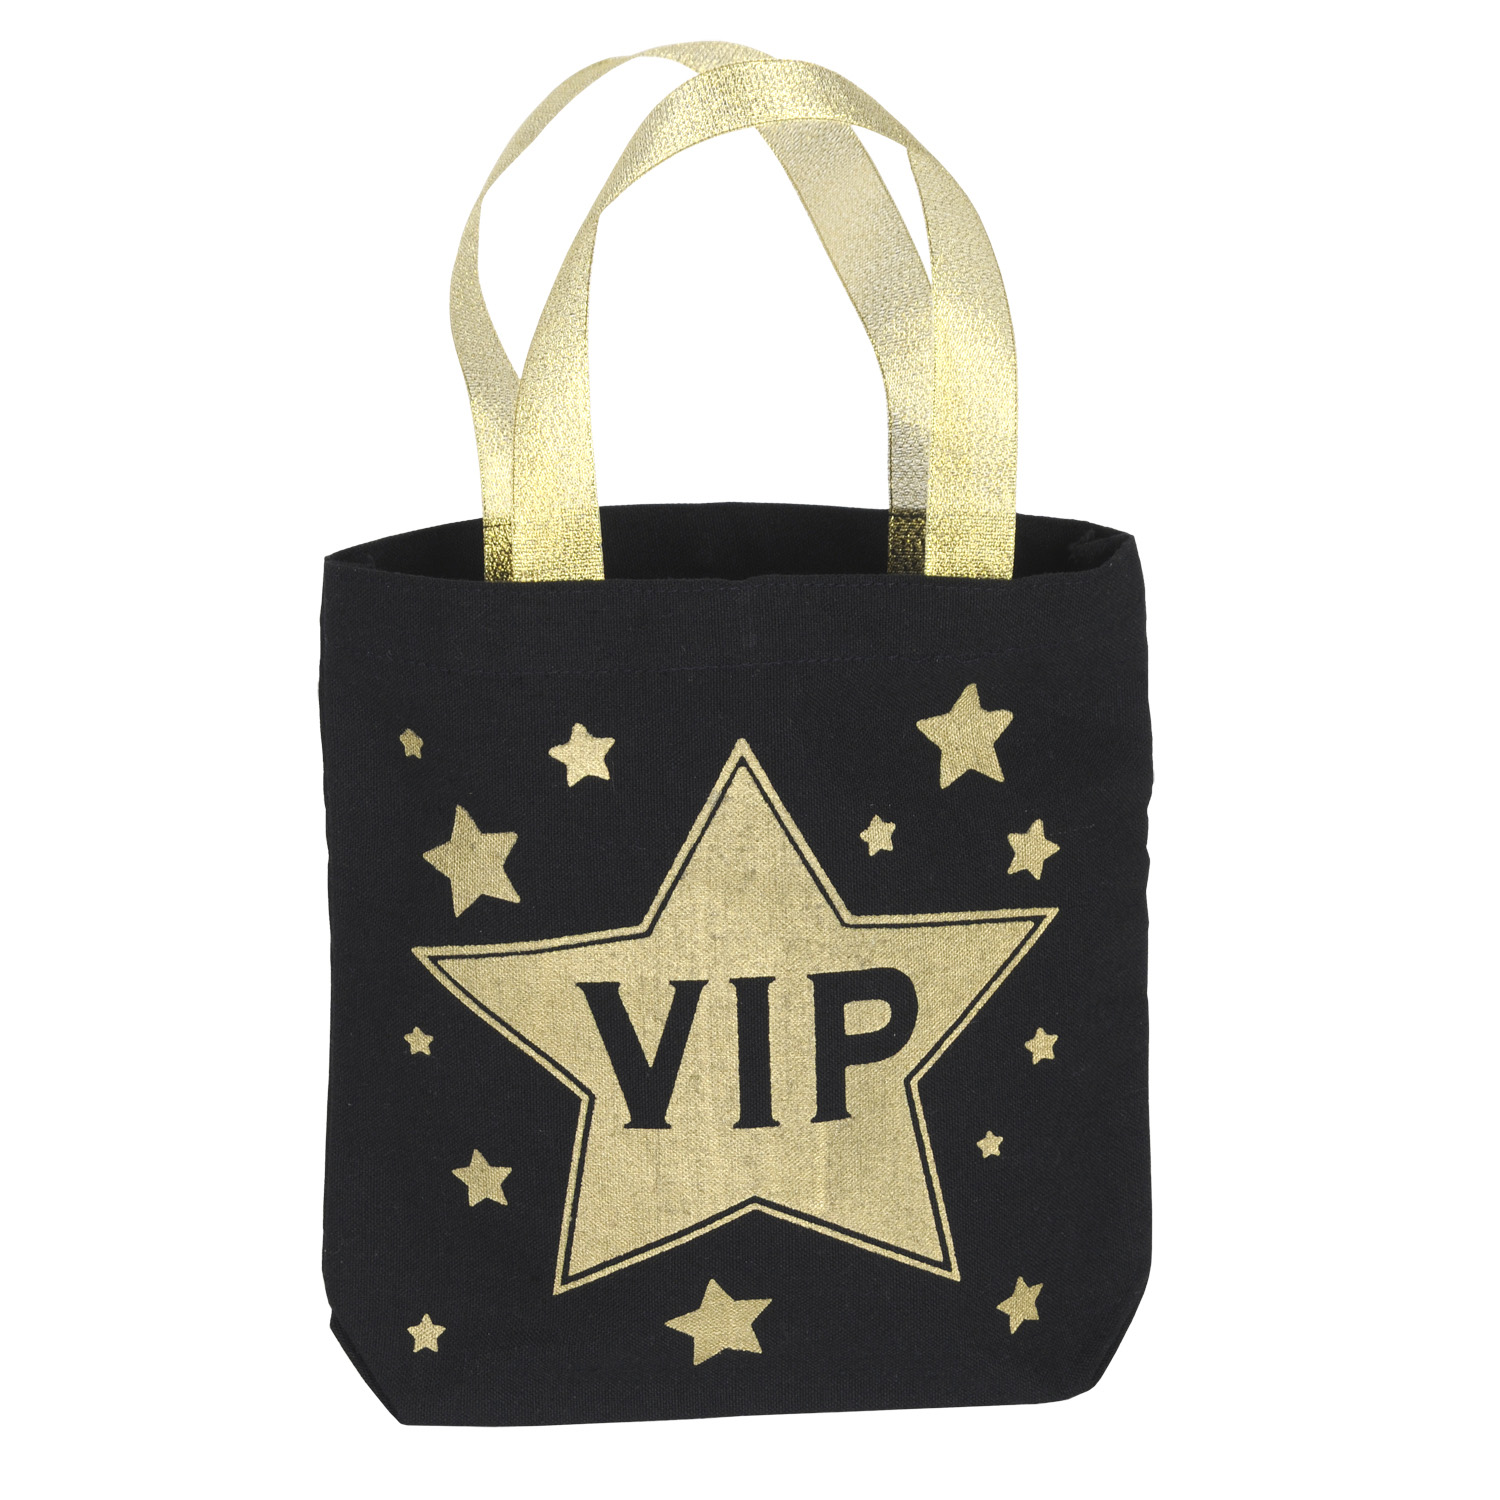 favor bag with gold stars and VIP written inside a large star